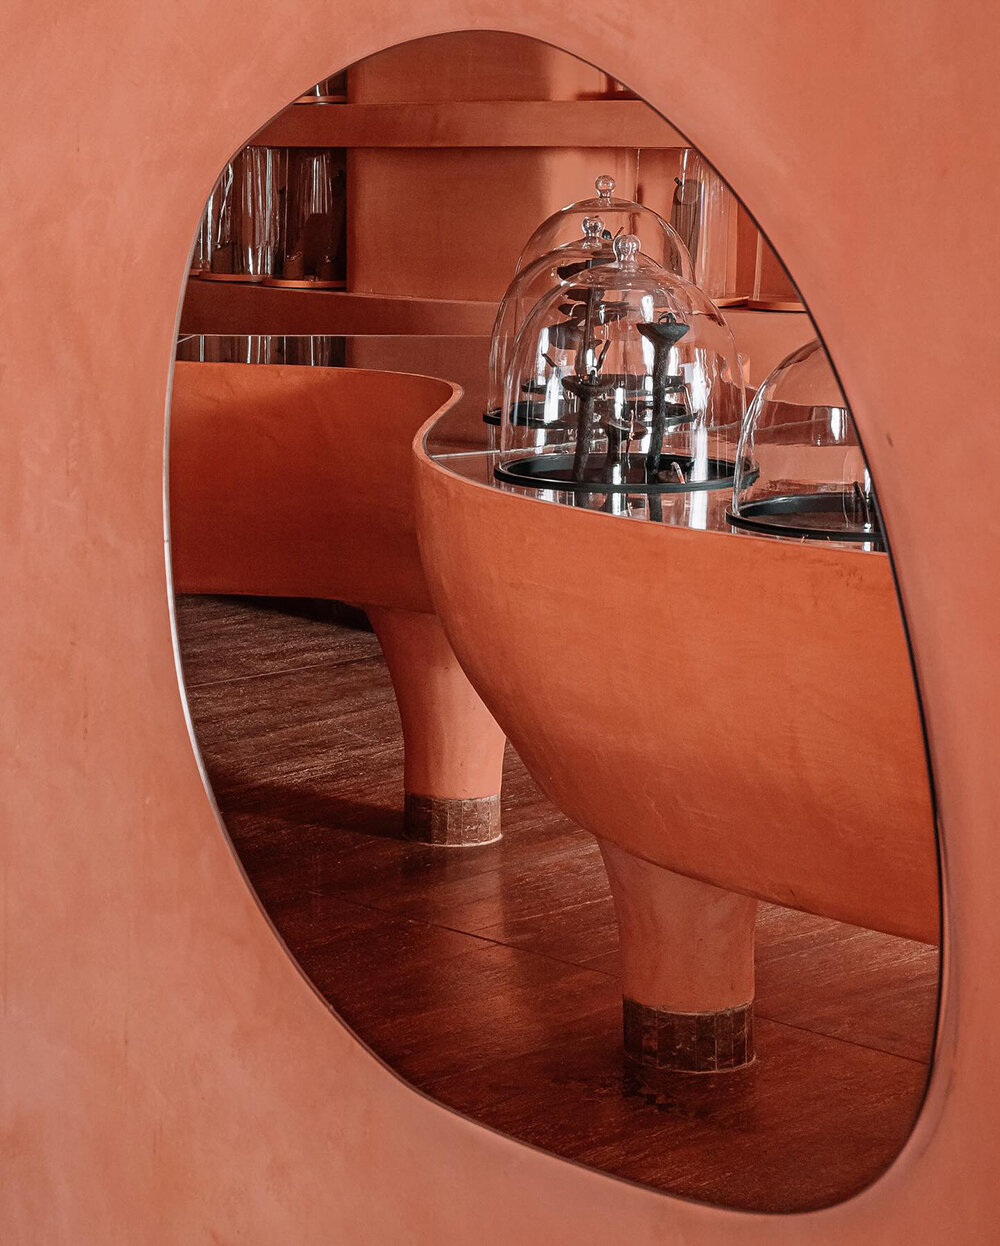 museLAB's jewelry store in ahmedabad recalls a voluptuous terracotta landscape